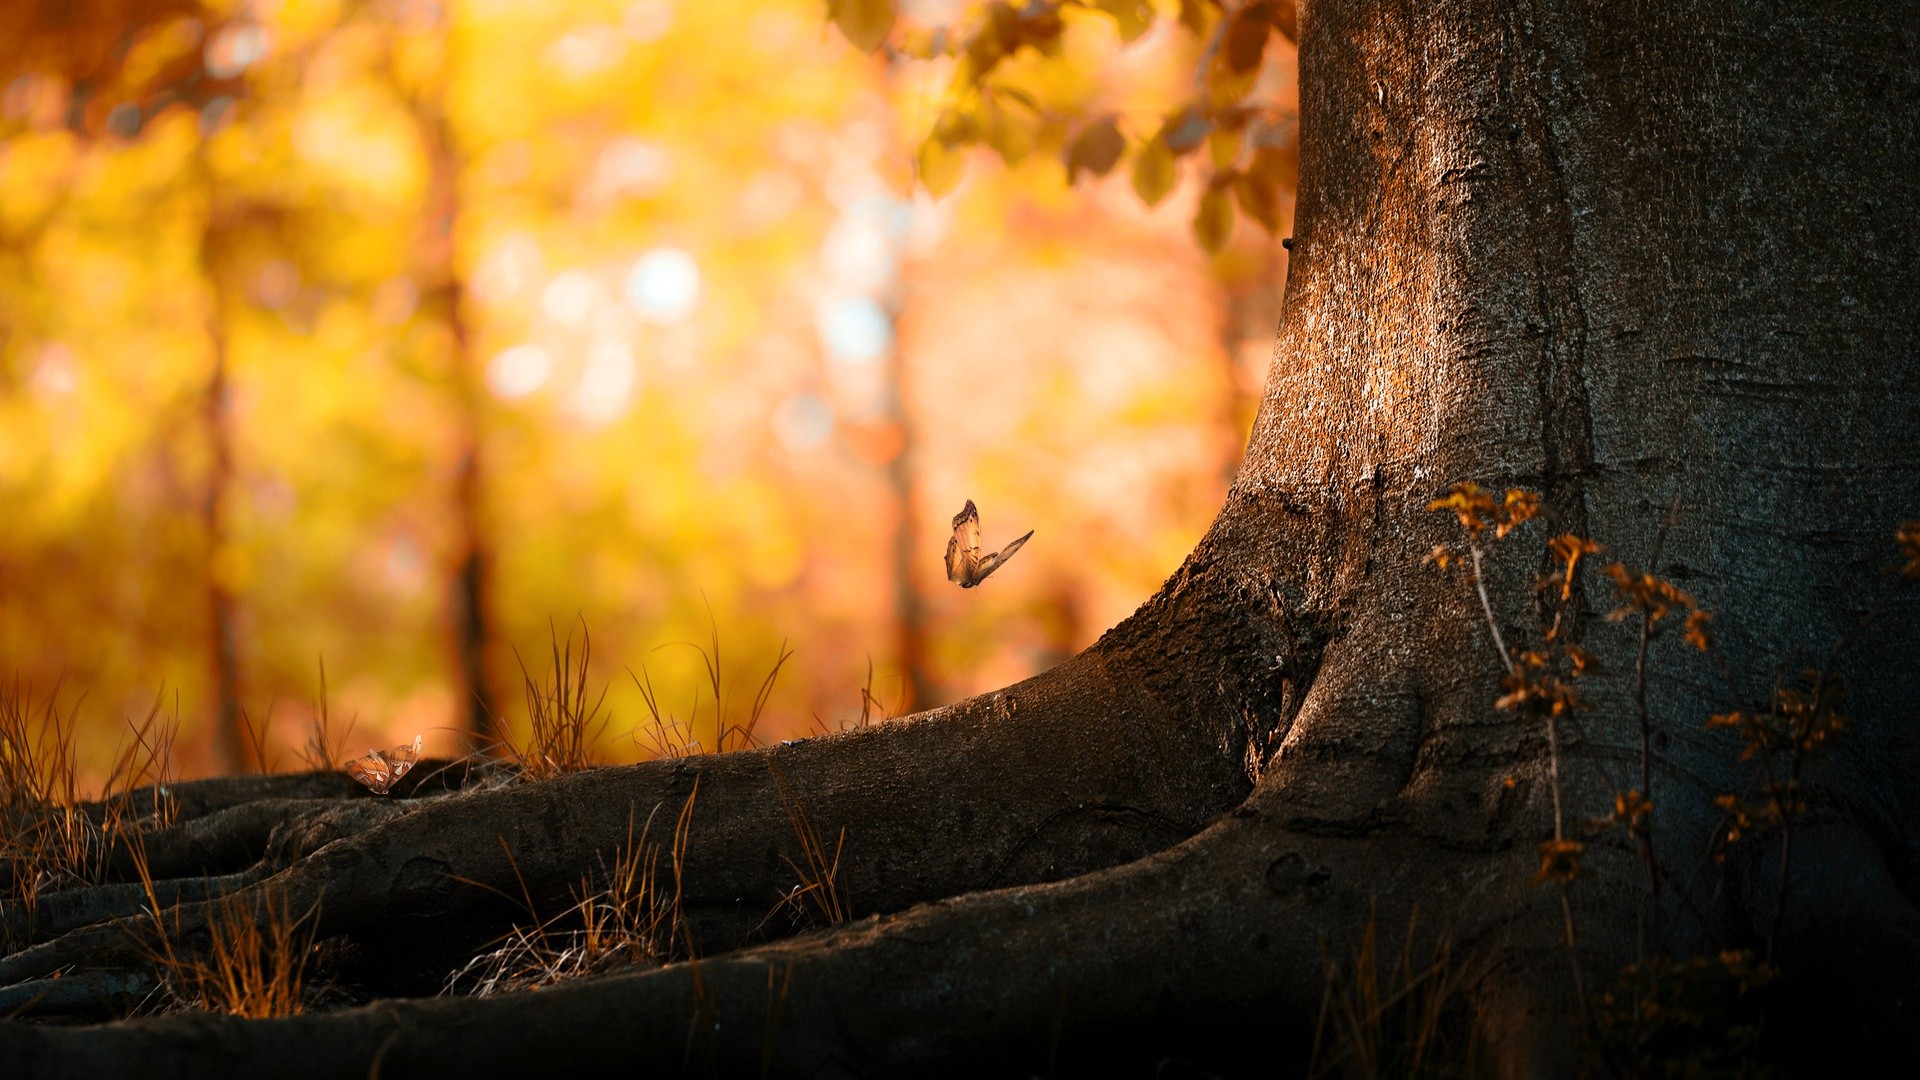 General 1920x1080 butterfly trees nature bokeh fall insect